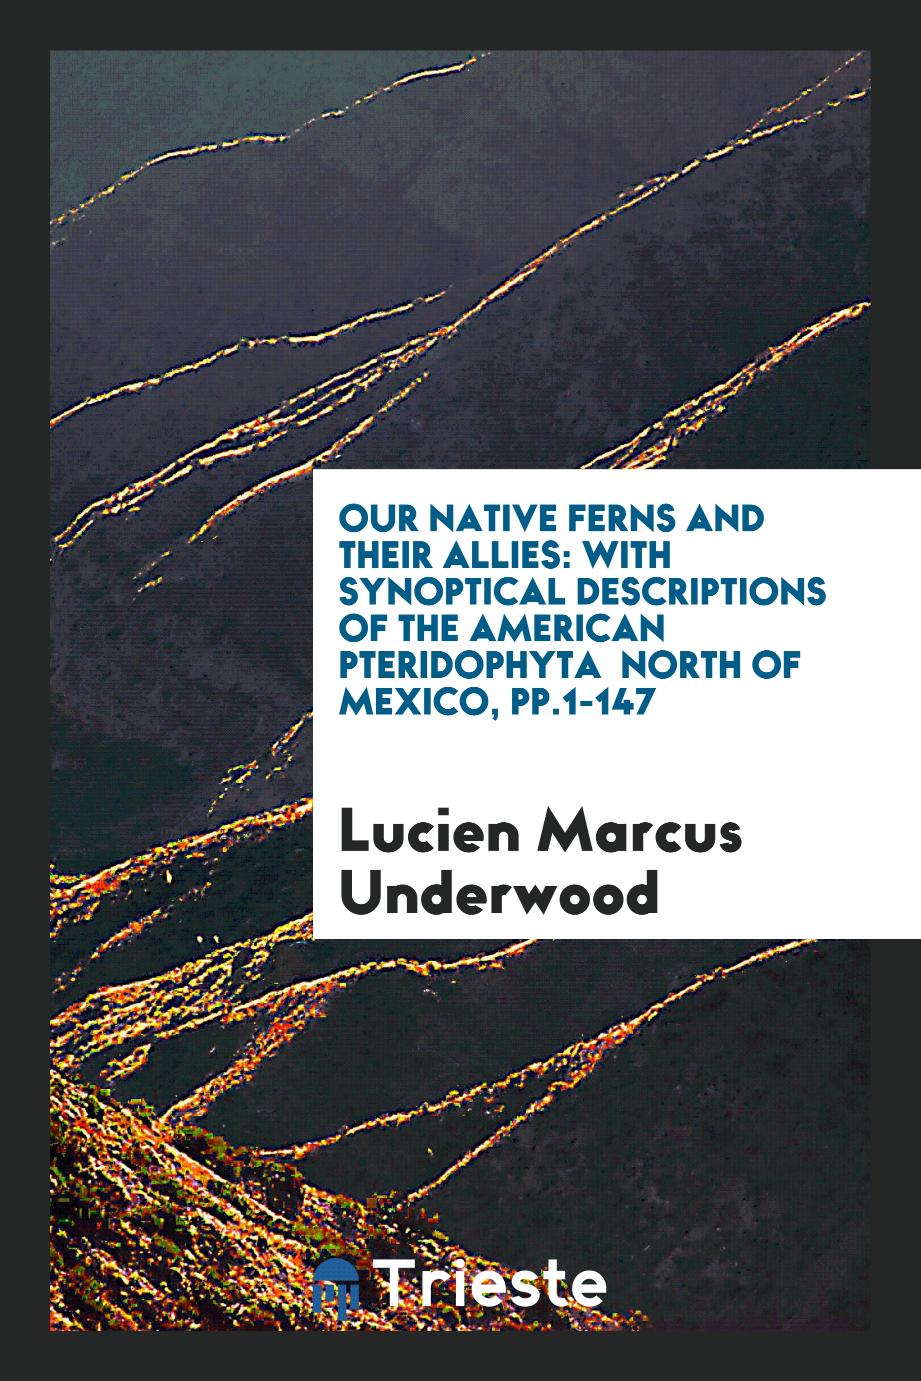 Our Native Ferns and Their Allies: With Synoptical Descriptions of the American Pteridophyta North of Mexico, pp.1-147